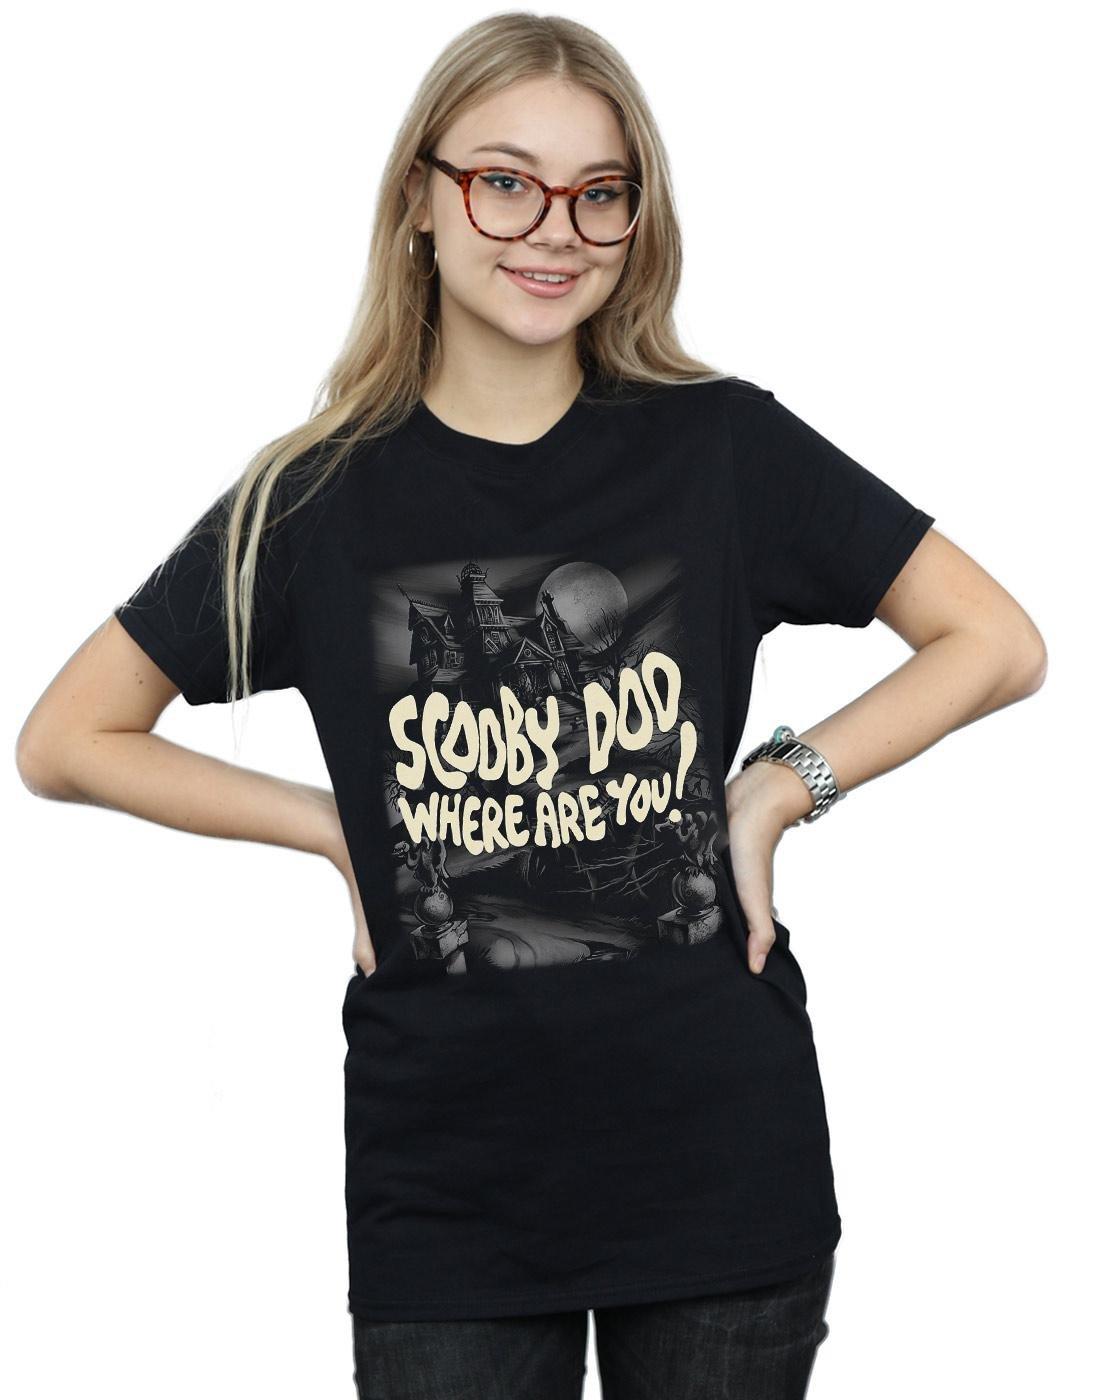 SCOOBY DOO  Tshirt WHERE ARE YOU? 